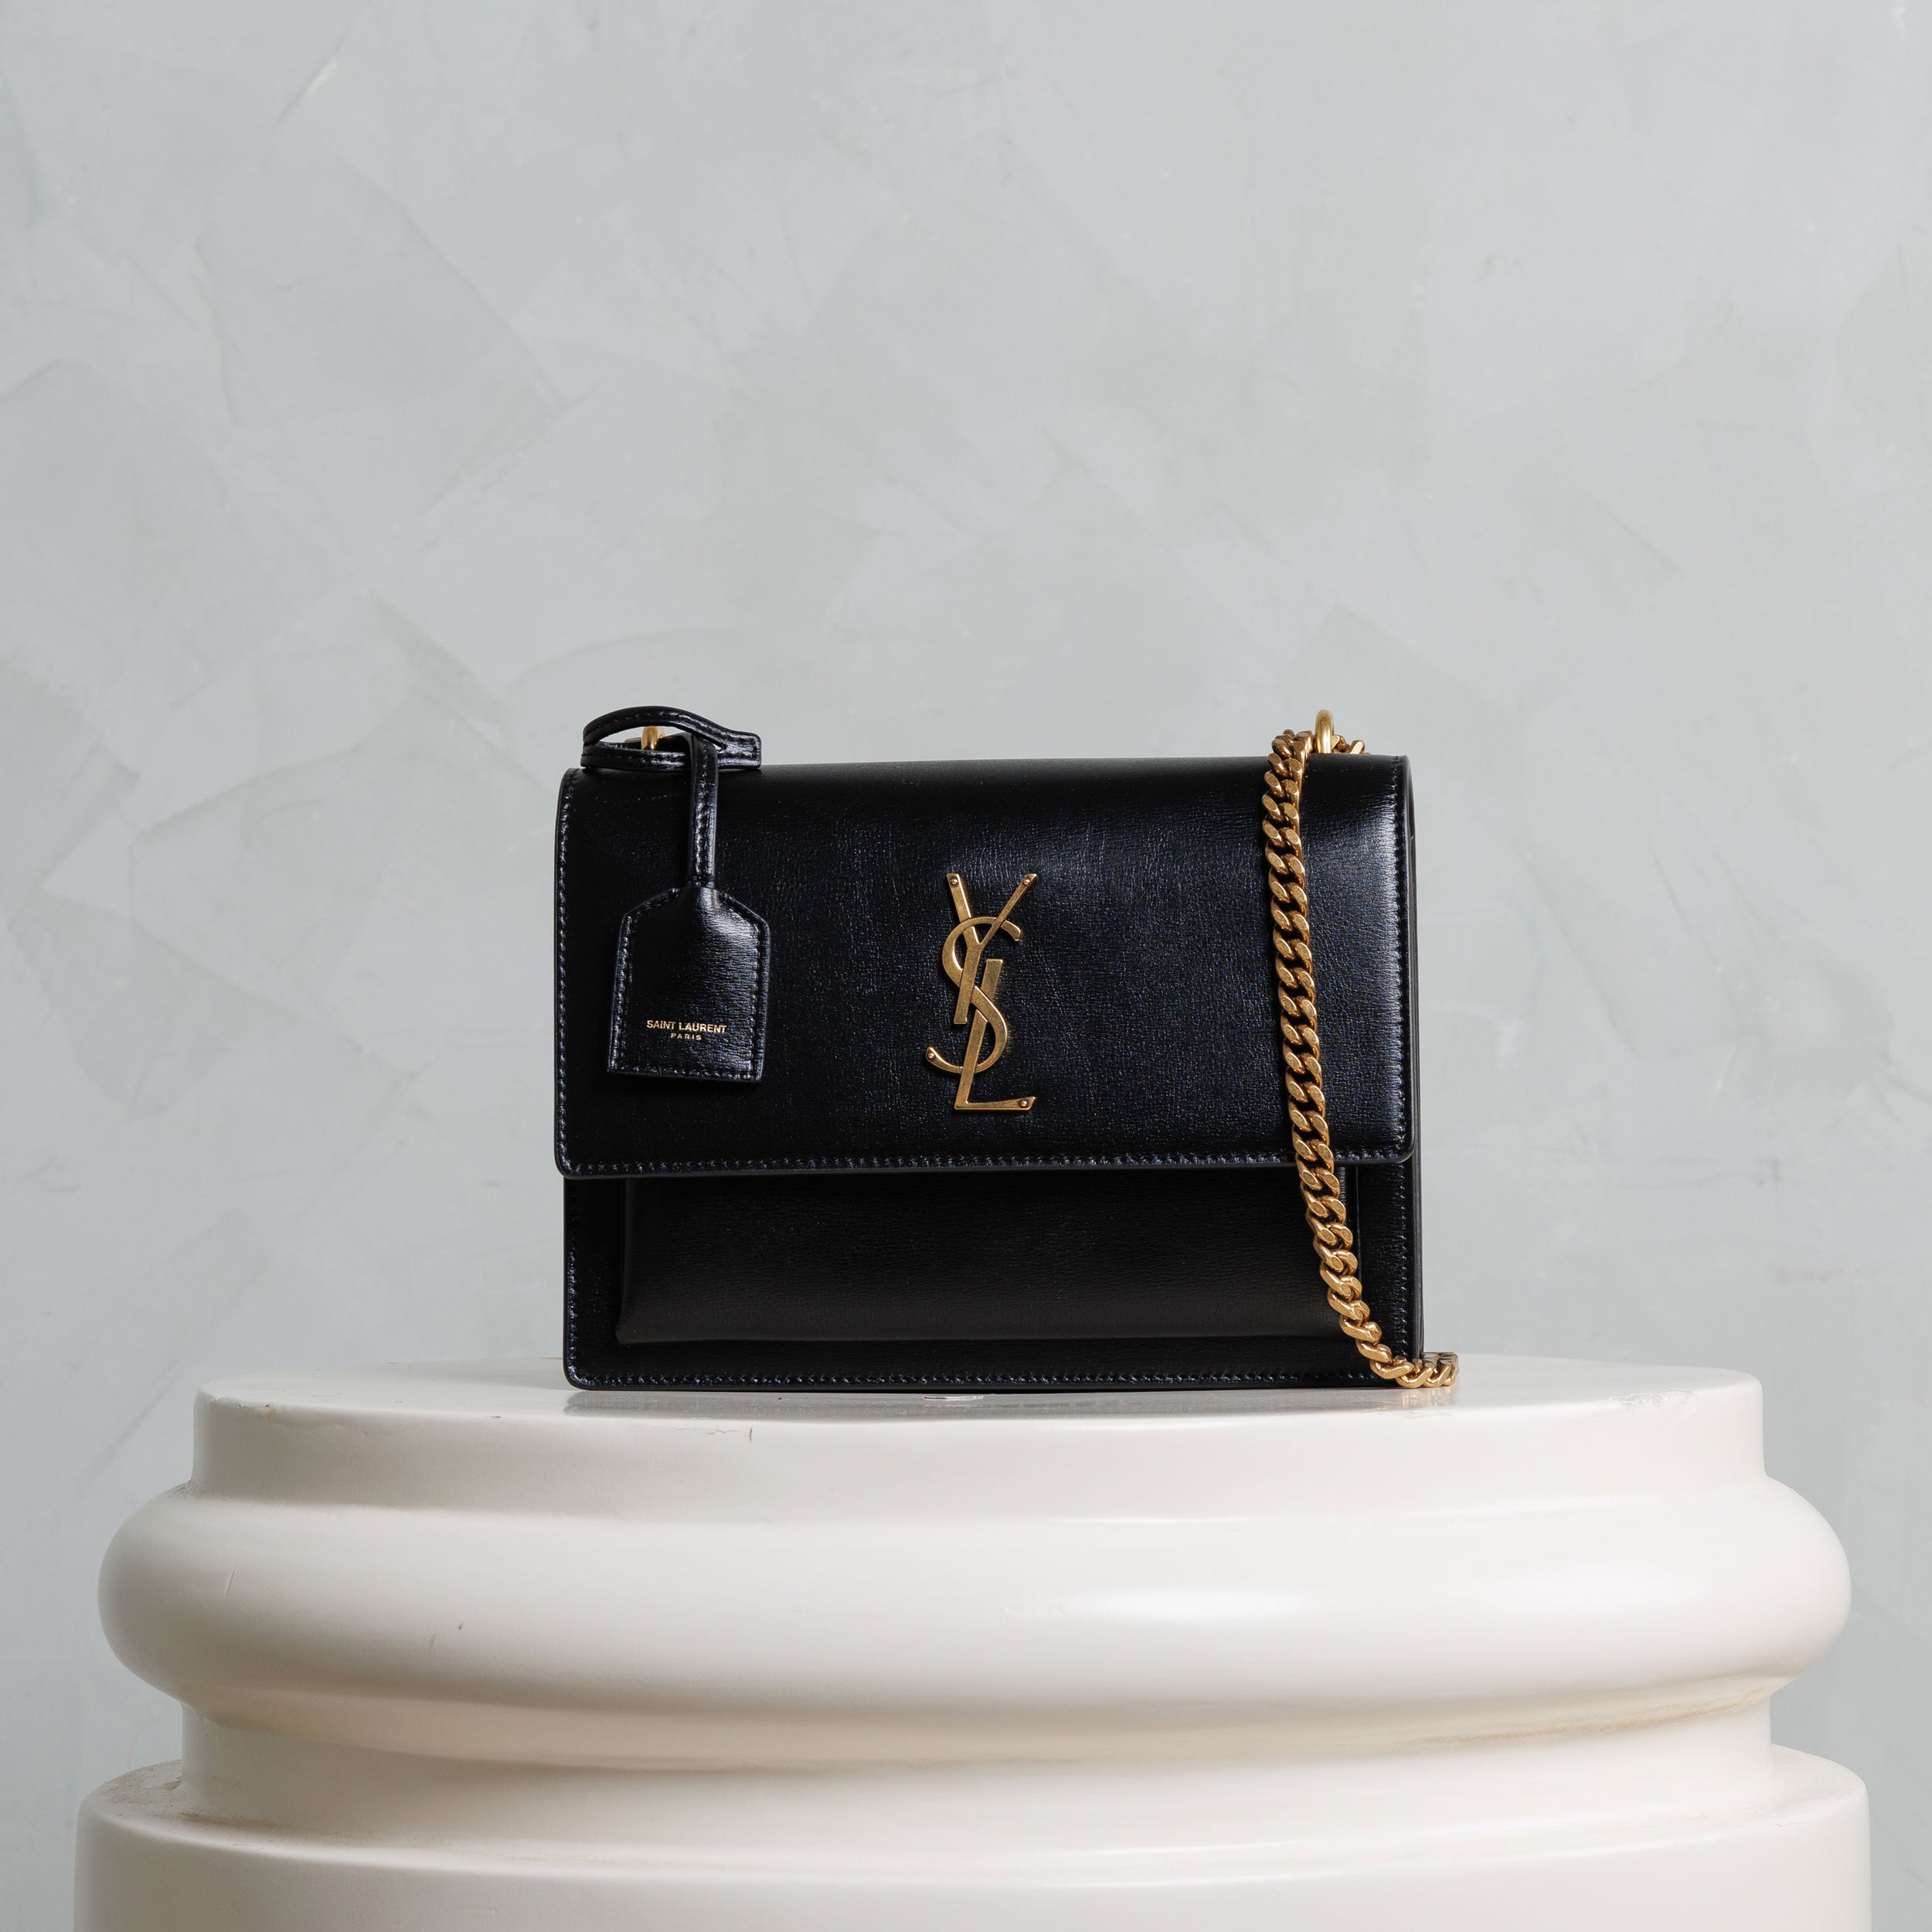 Saint Laurent India- Buy YSL Items Online in at 40% Off